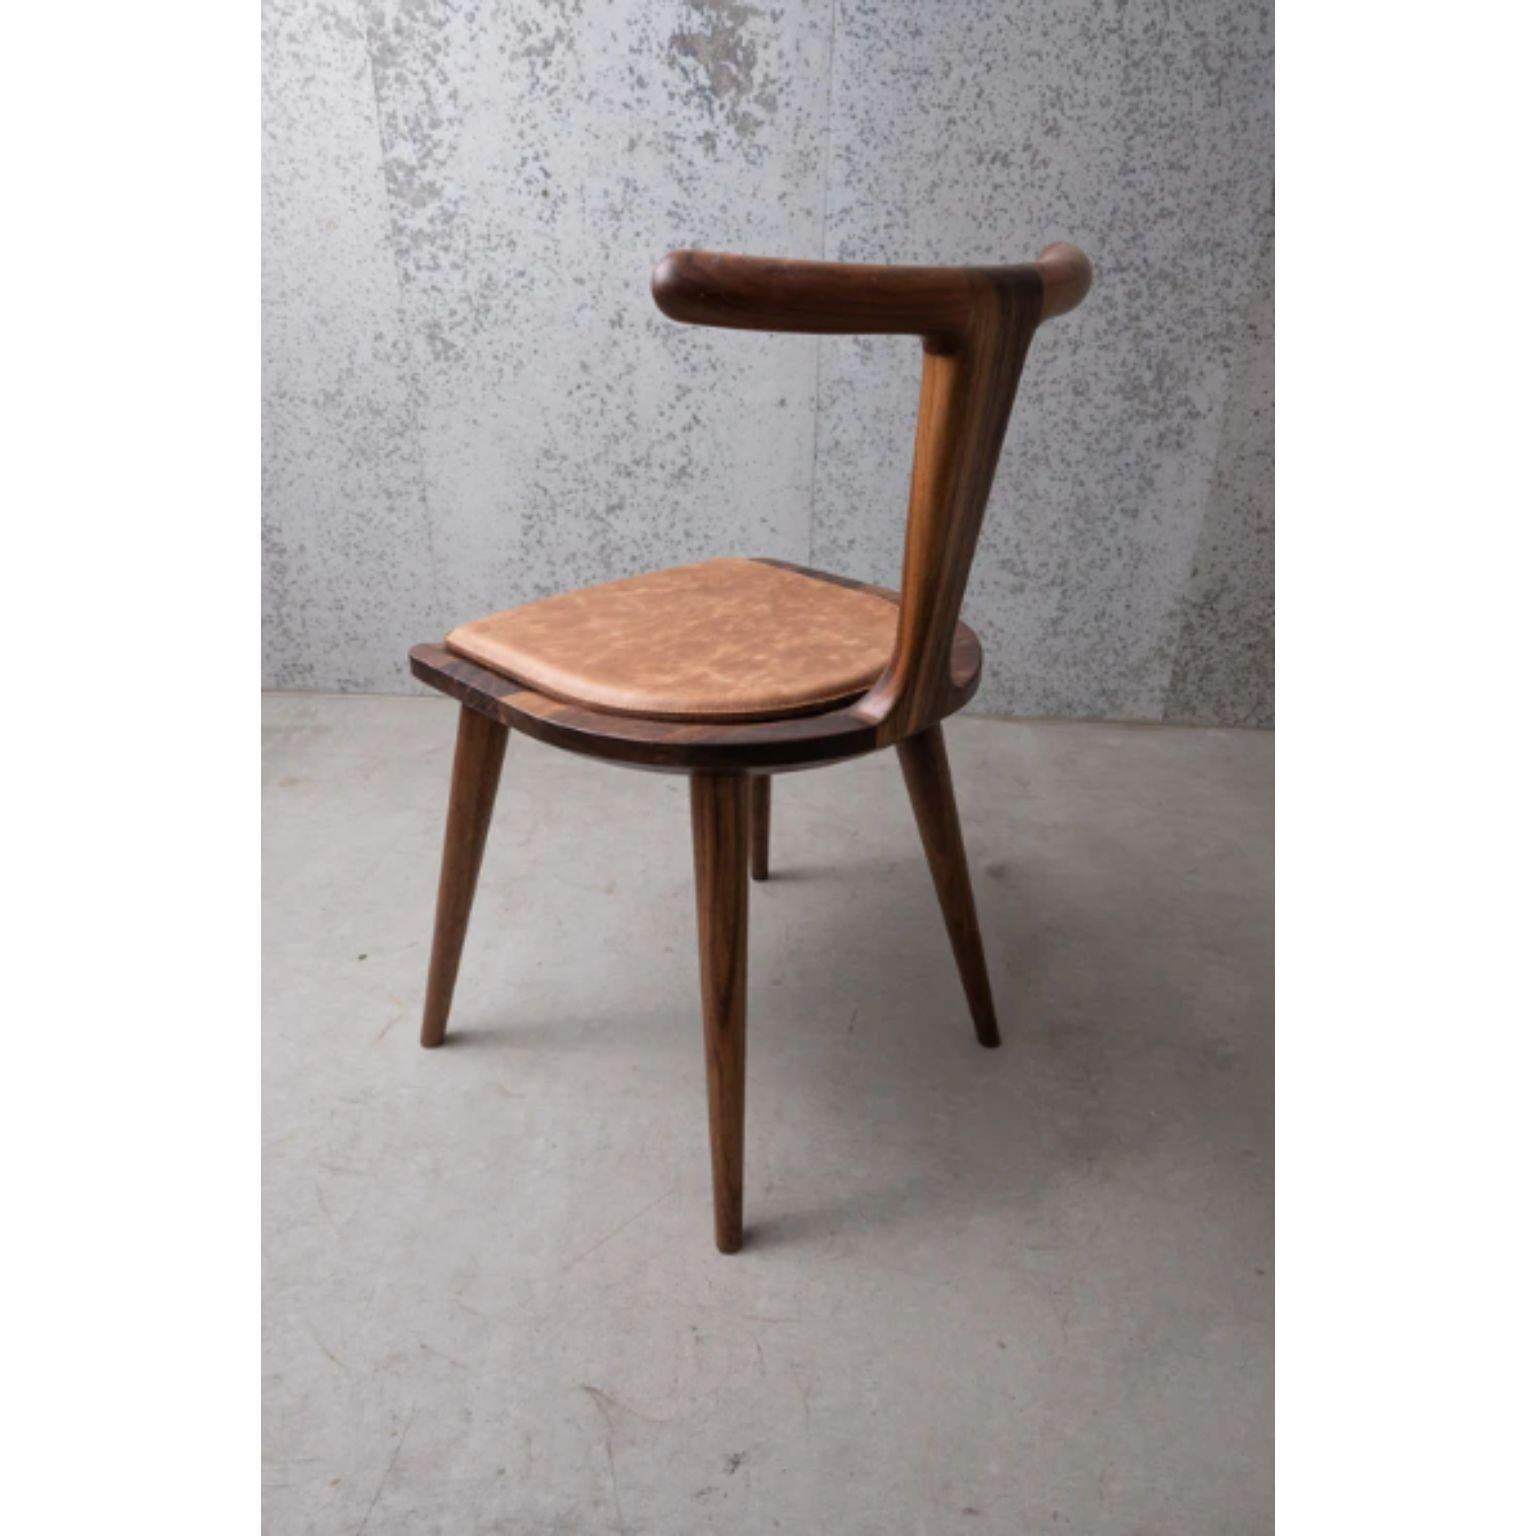 Modern Walnut Oxbend Chair with Leather Seat Pad by Fernweh Woodworking